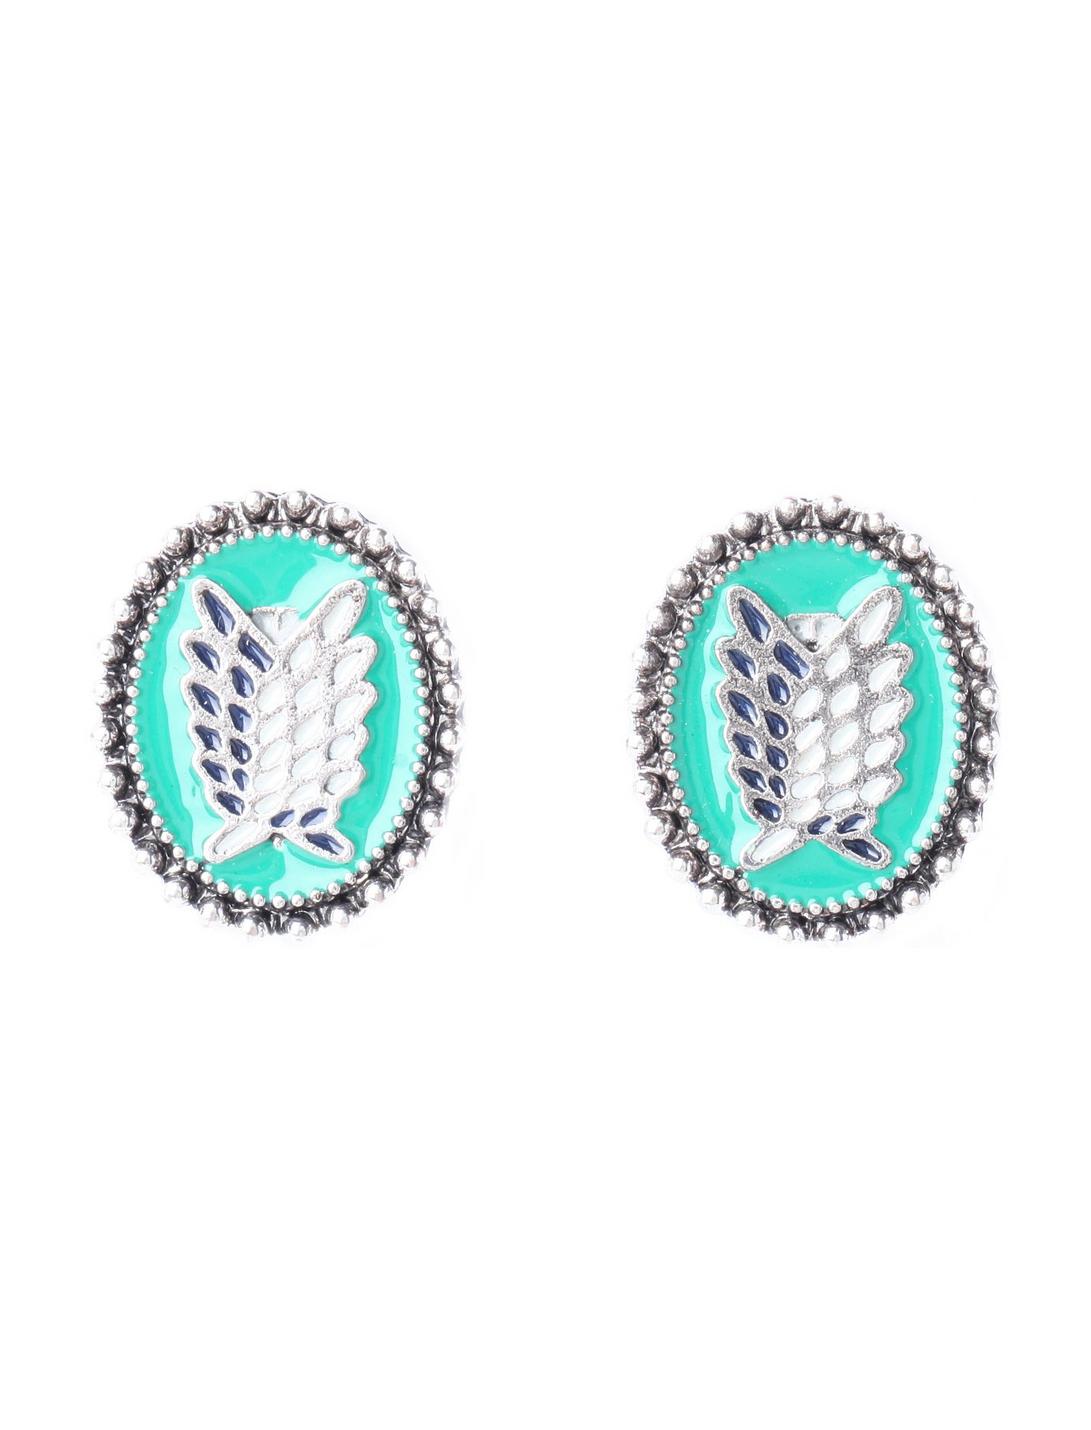 Attack On Titan Scout Shield Stud Earrings, , hi-res